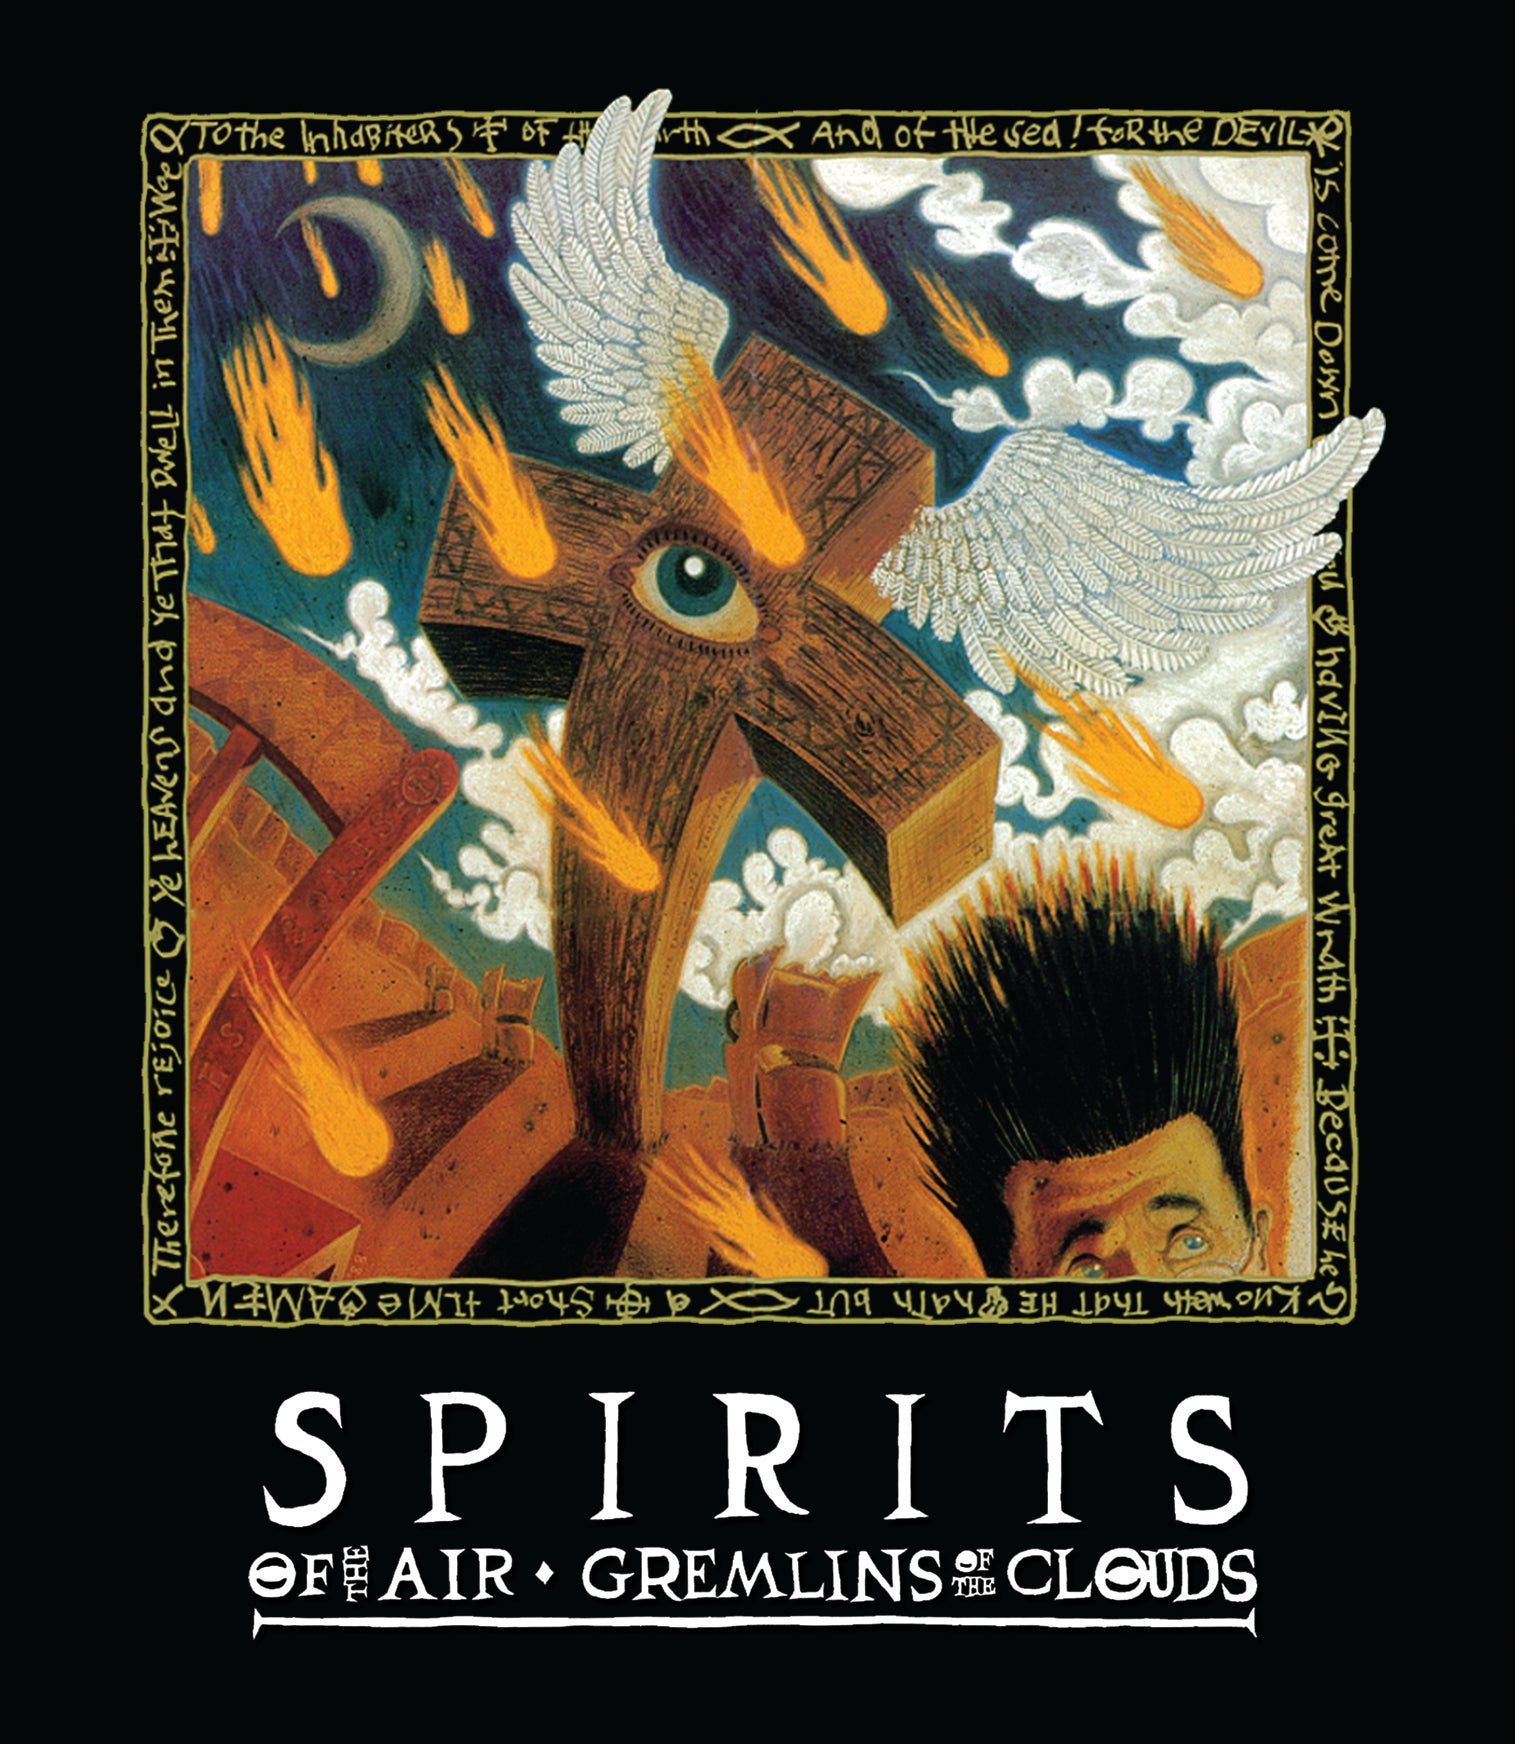 SPIRITS OF THE AIR, GREMLINS OF THE CLOUDS BLU-RAY